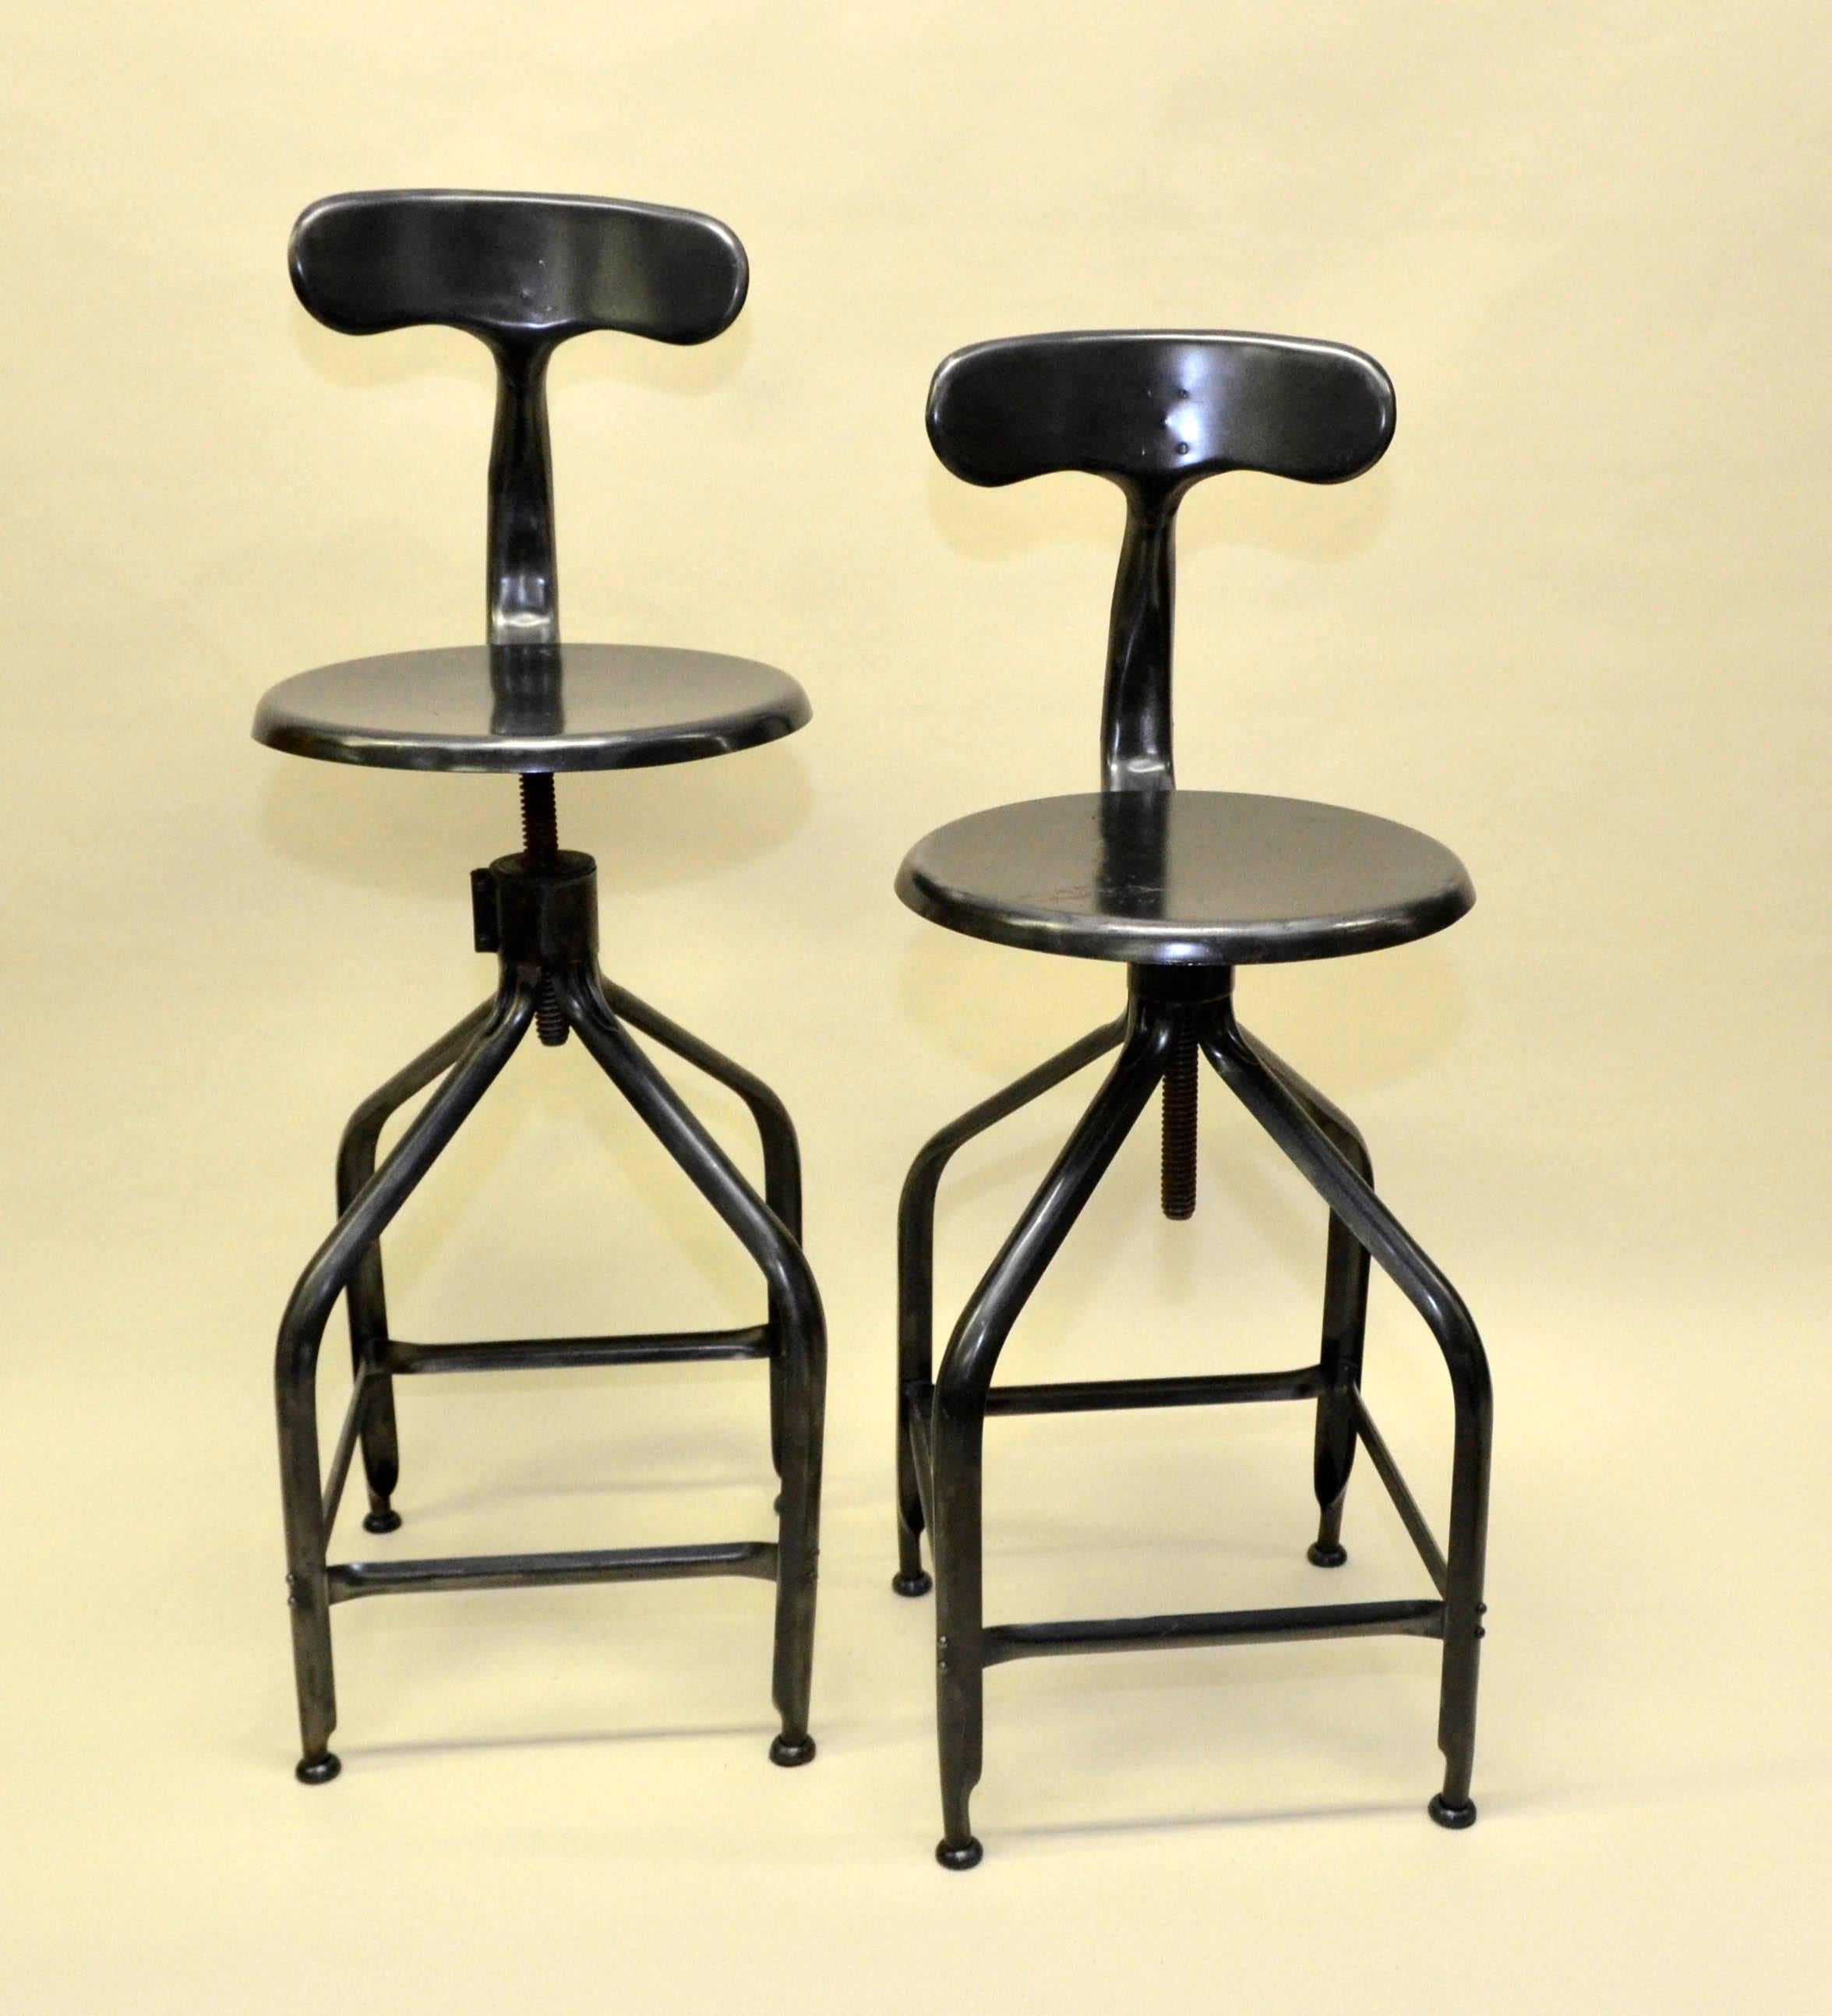 1960s French Nicolle Industrial Vintage Adjustable Metal High Stools For Sale 1